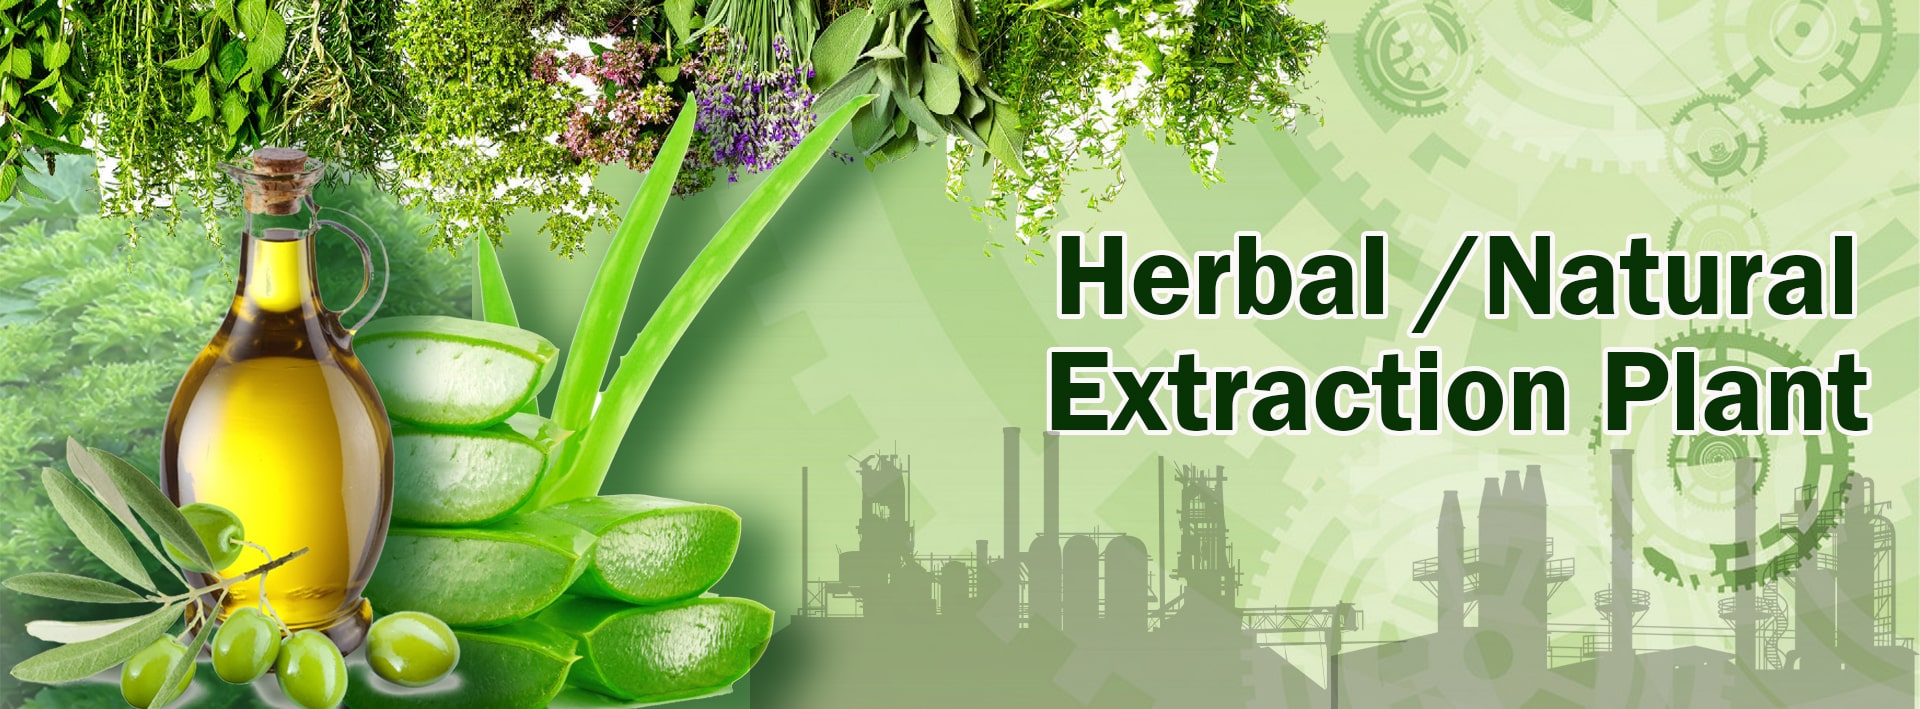 Herbal Natural Extraction Plant Supplier